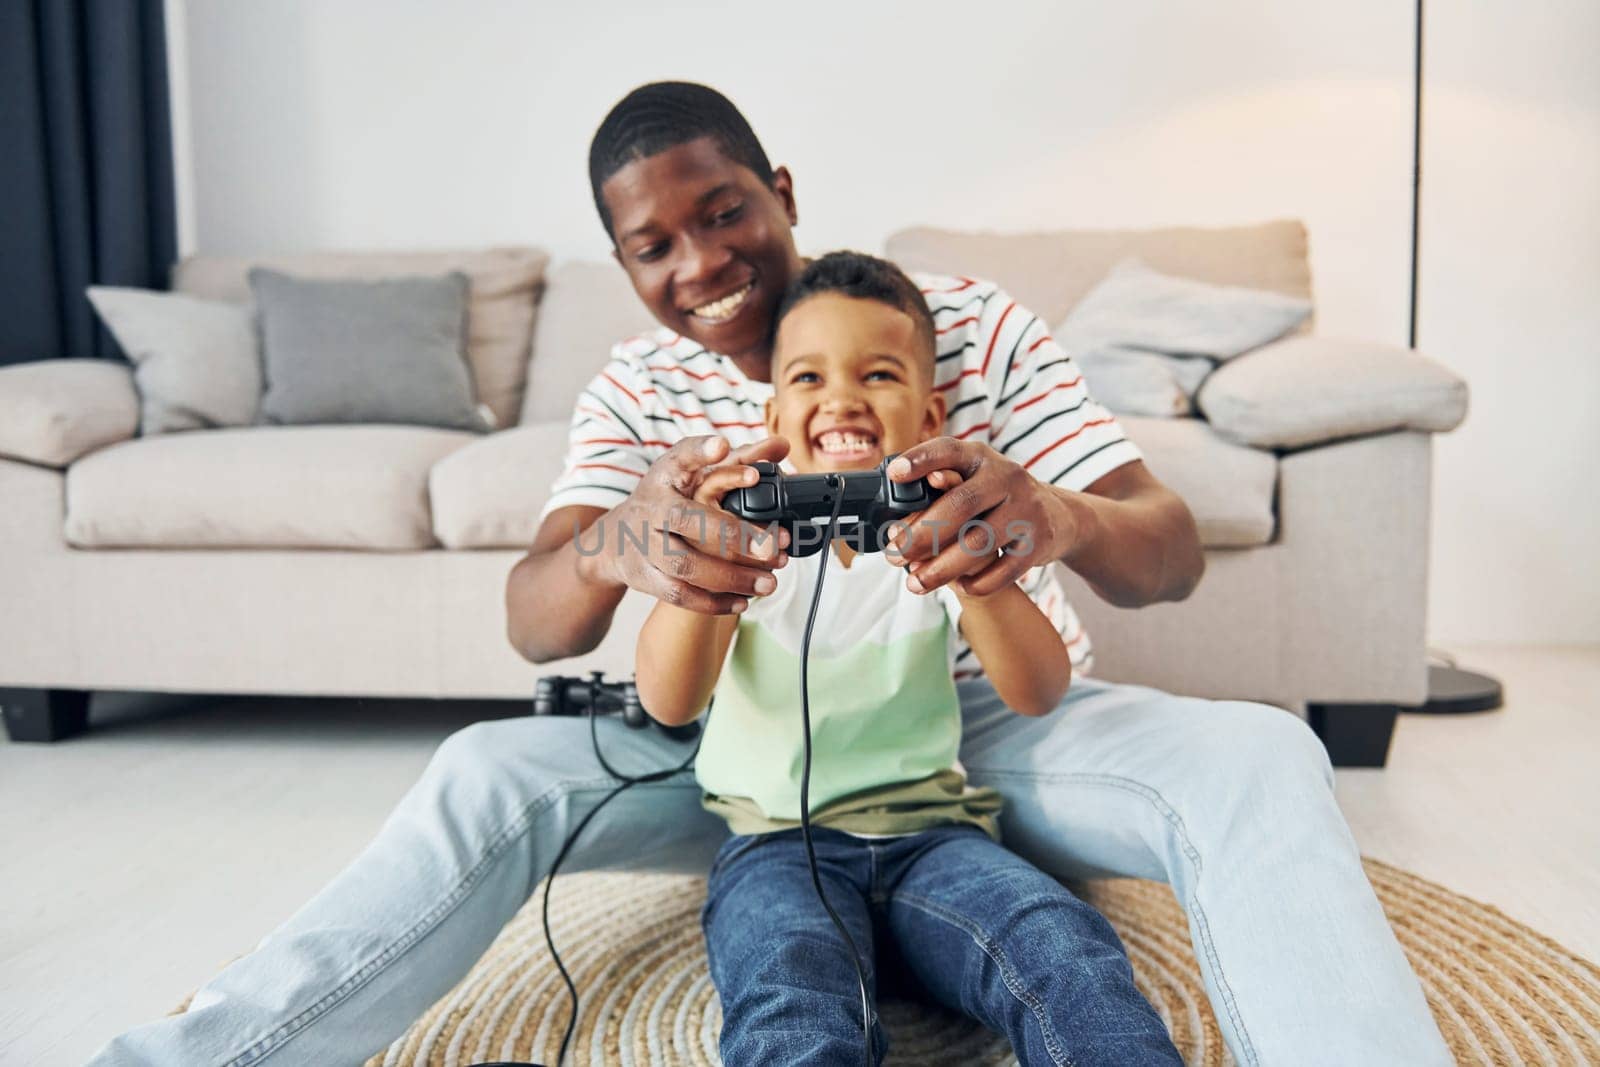 Using joysticks to play video game. African american father with his young son at home by Standret